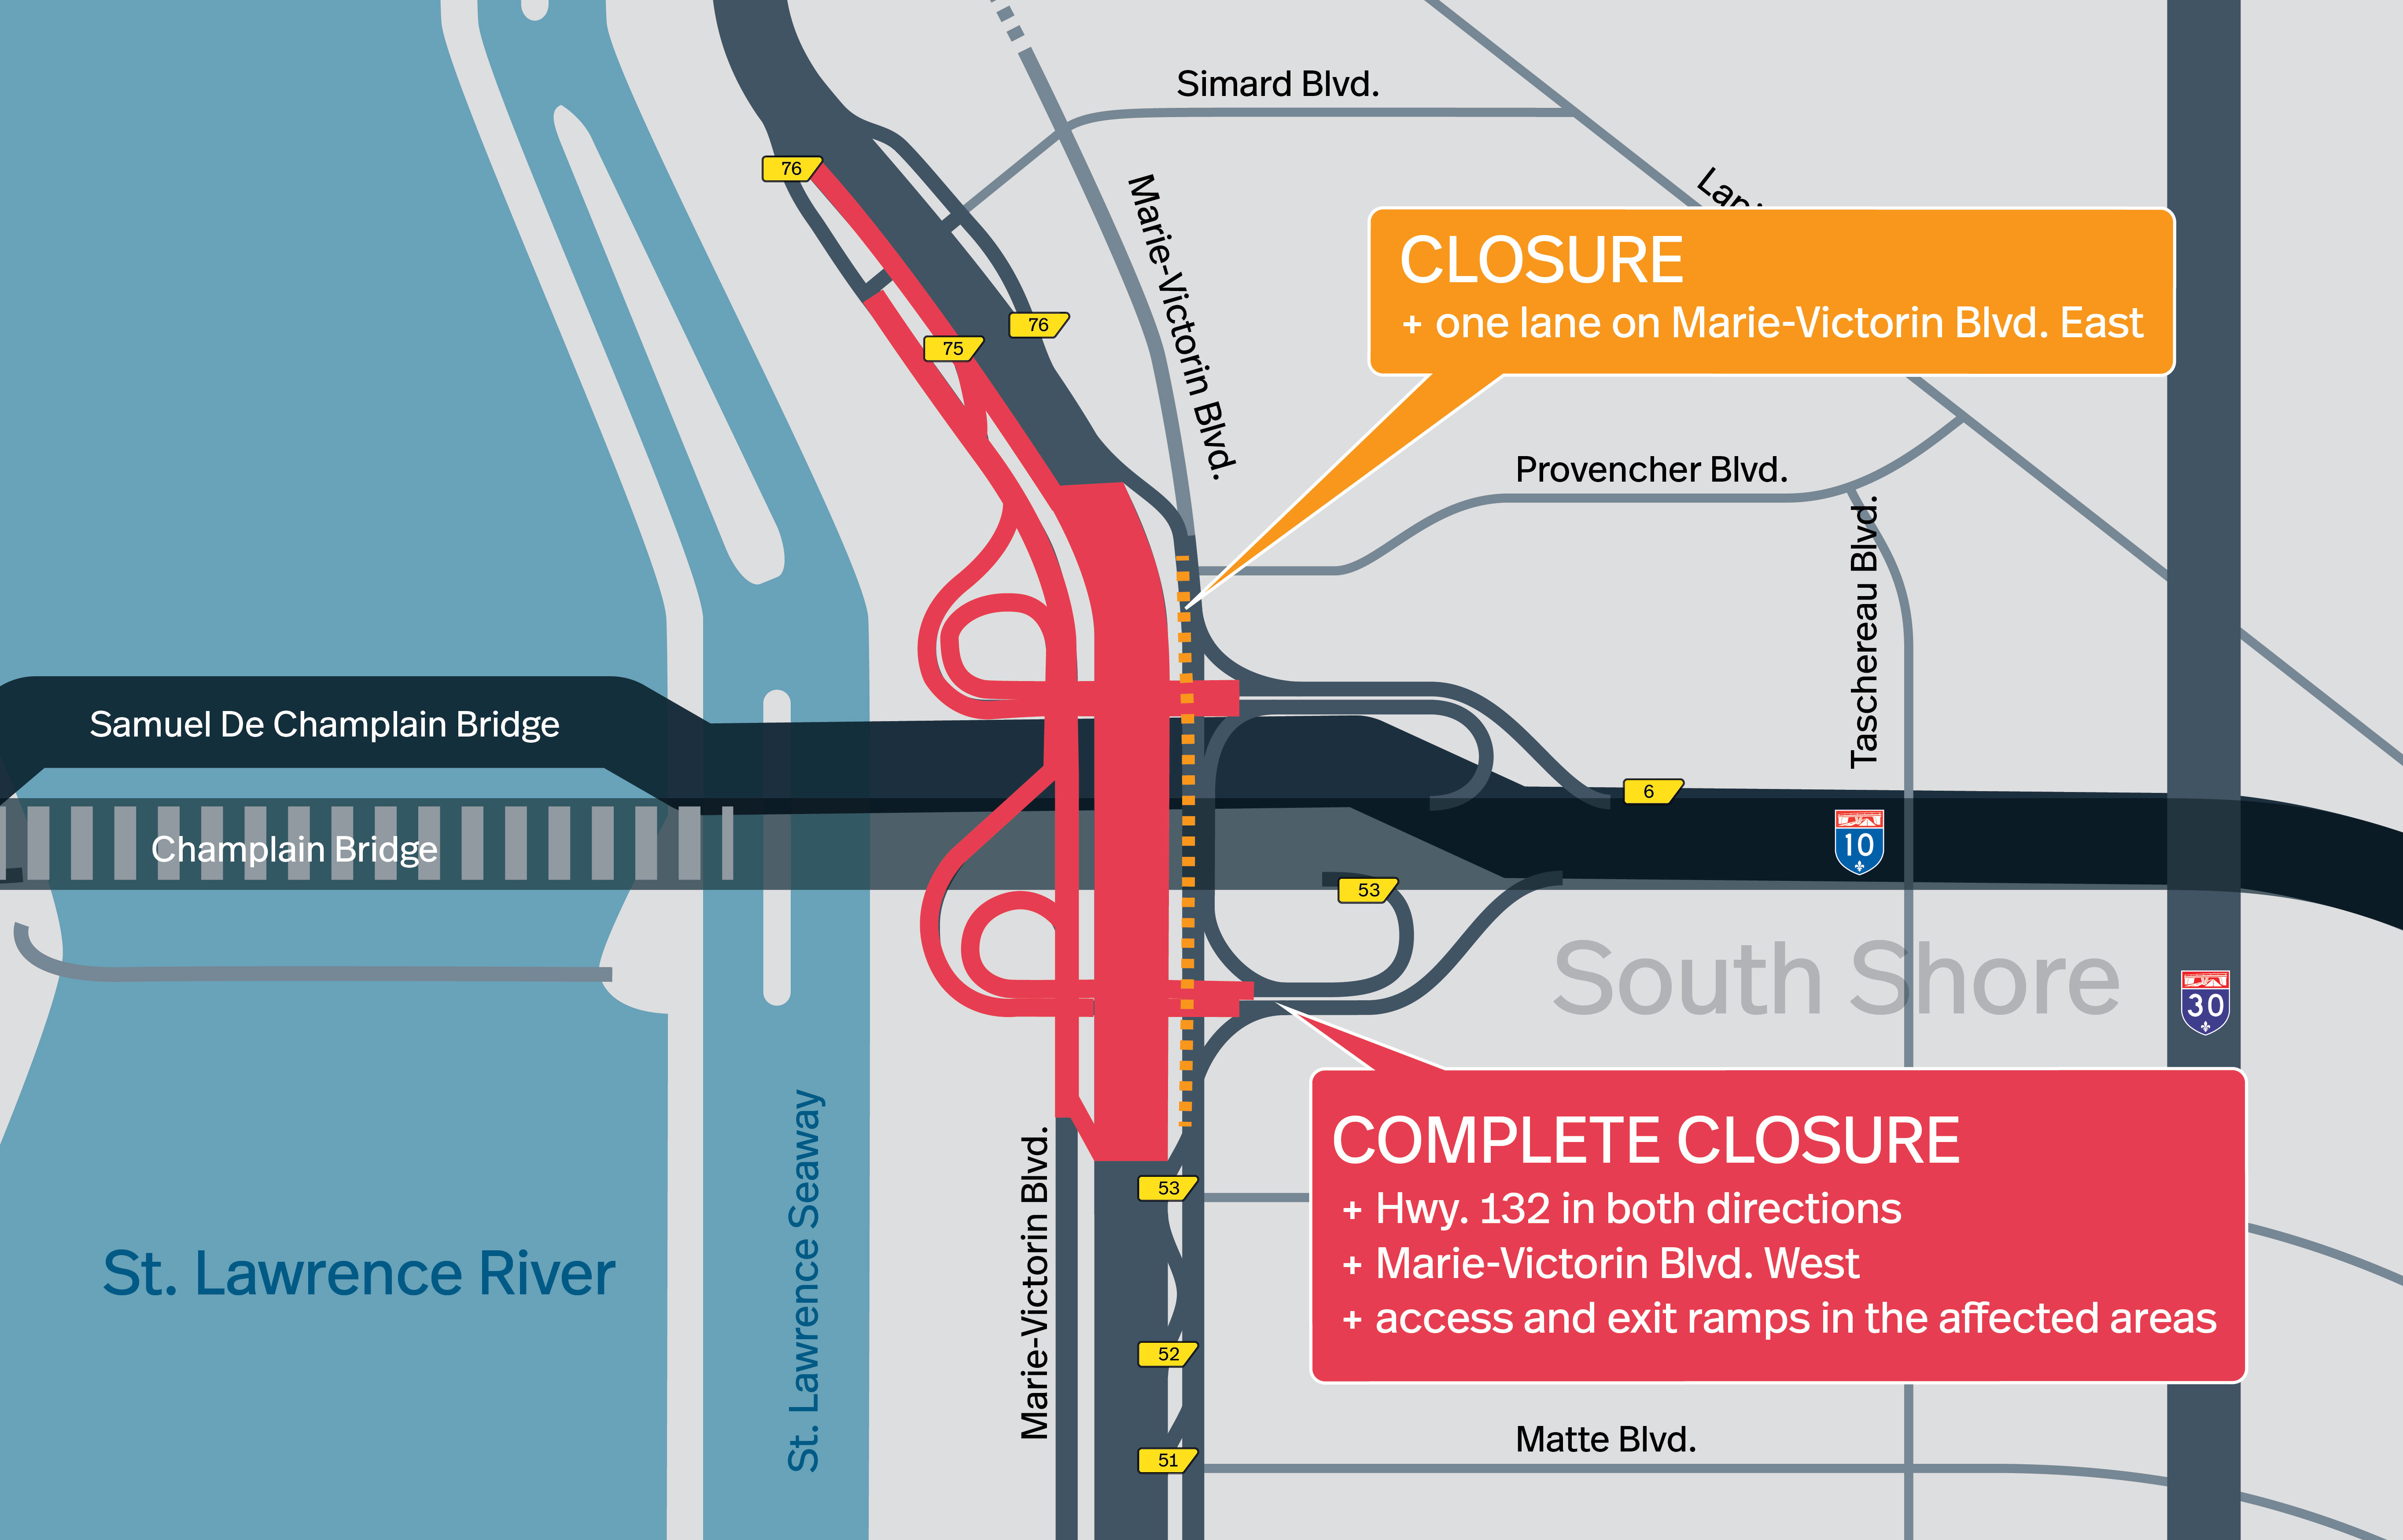 Brossard Sector | Complete closure of Hwy. 132 in both directions under the original Champlain Bridge, from September 23 to 26